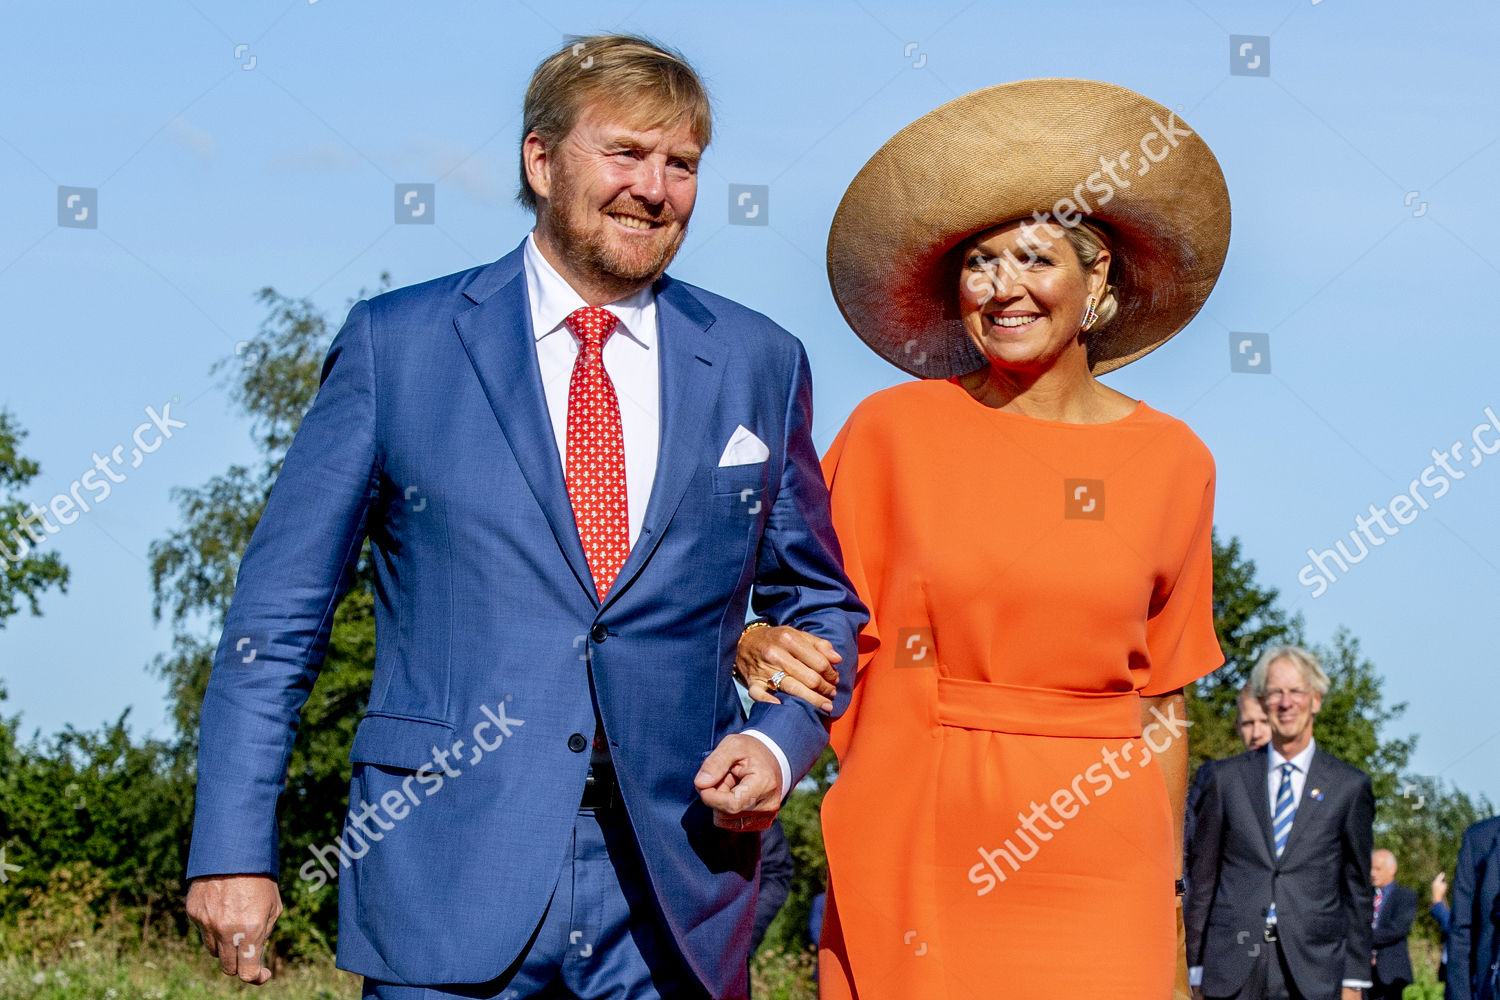 king-willem-alexander-and-queen-maxima-visit-to-ooststellingwerf-the-netherlands-shutterstock-editorial-10779750e.jpg